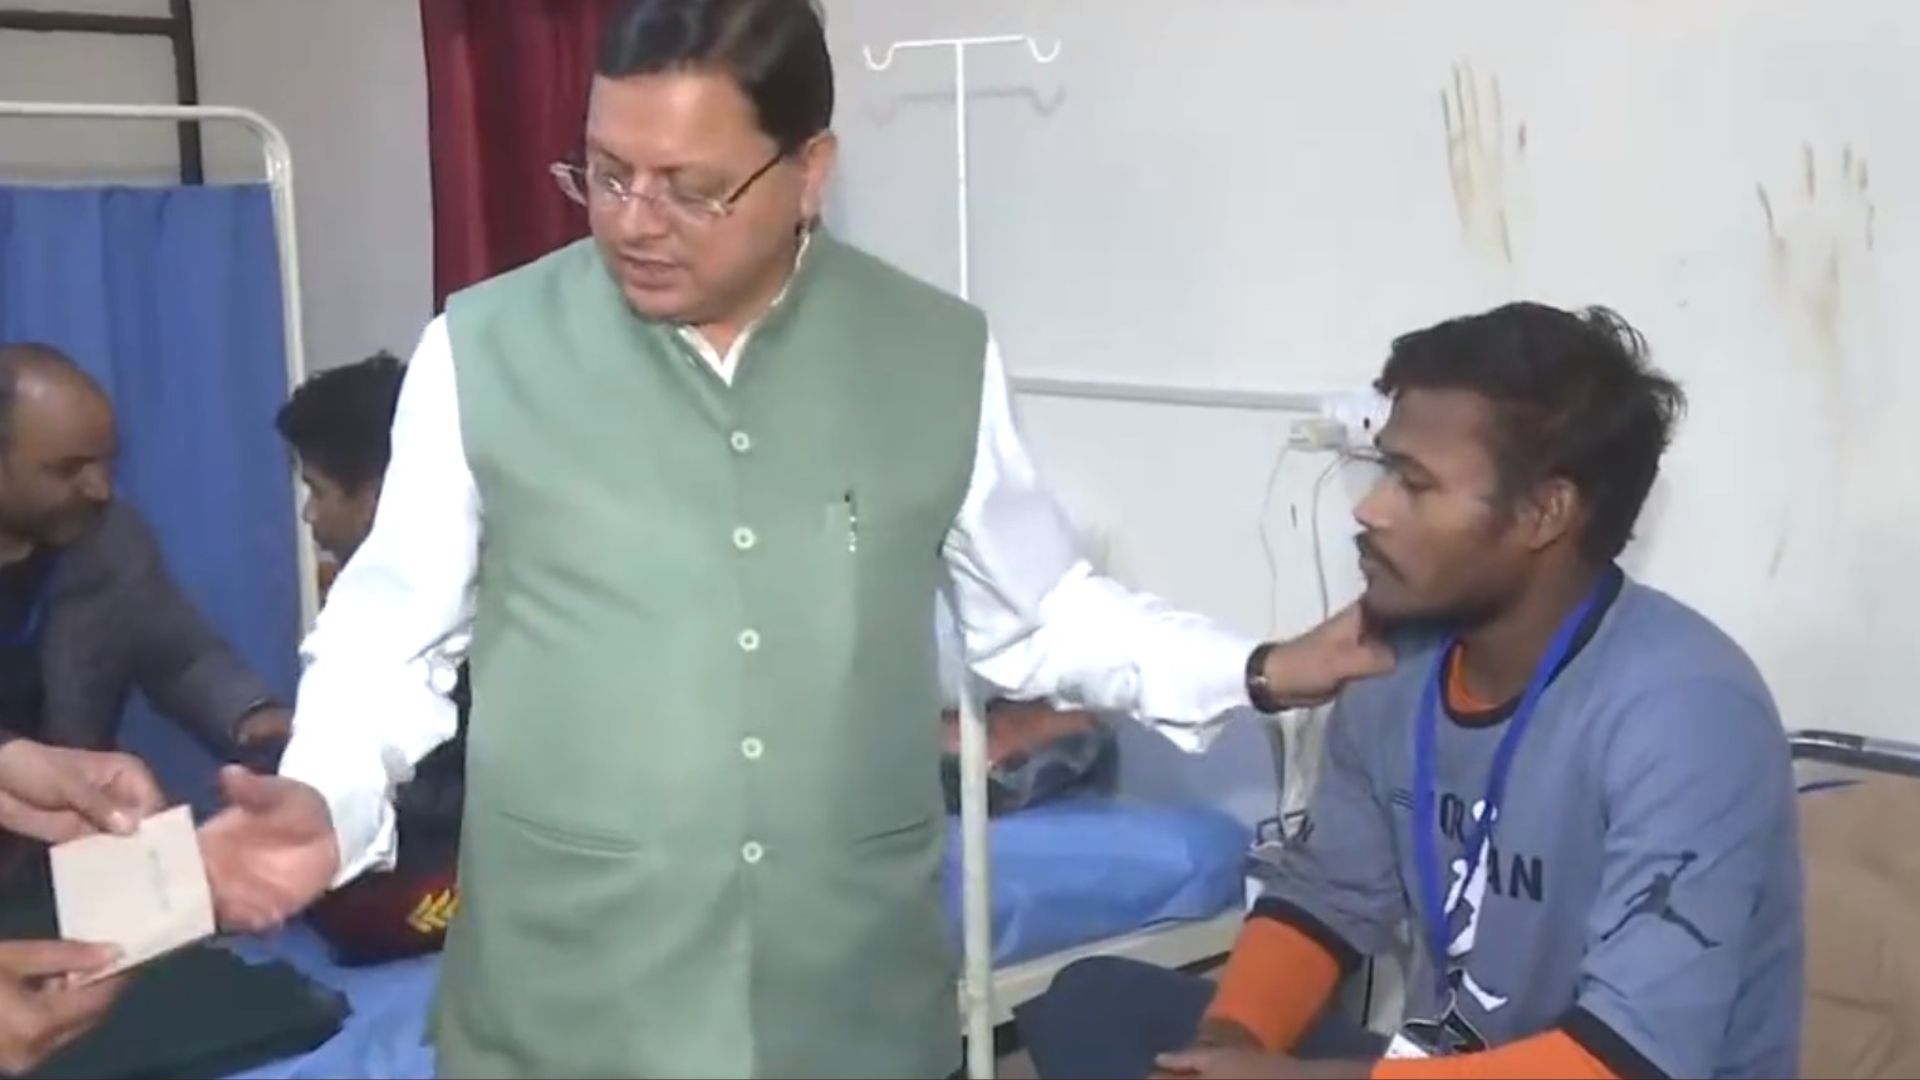 Uttarakhand Tunnel Rescue: CM Dhami Meets with Workers at Chinyalisaur Community Health Centre